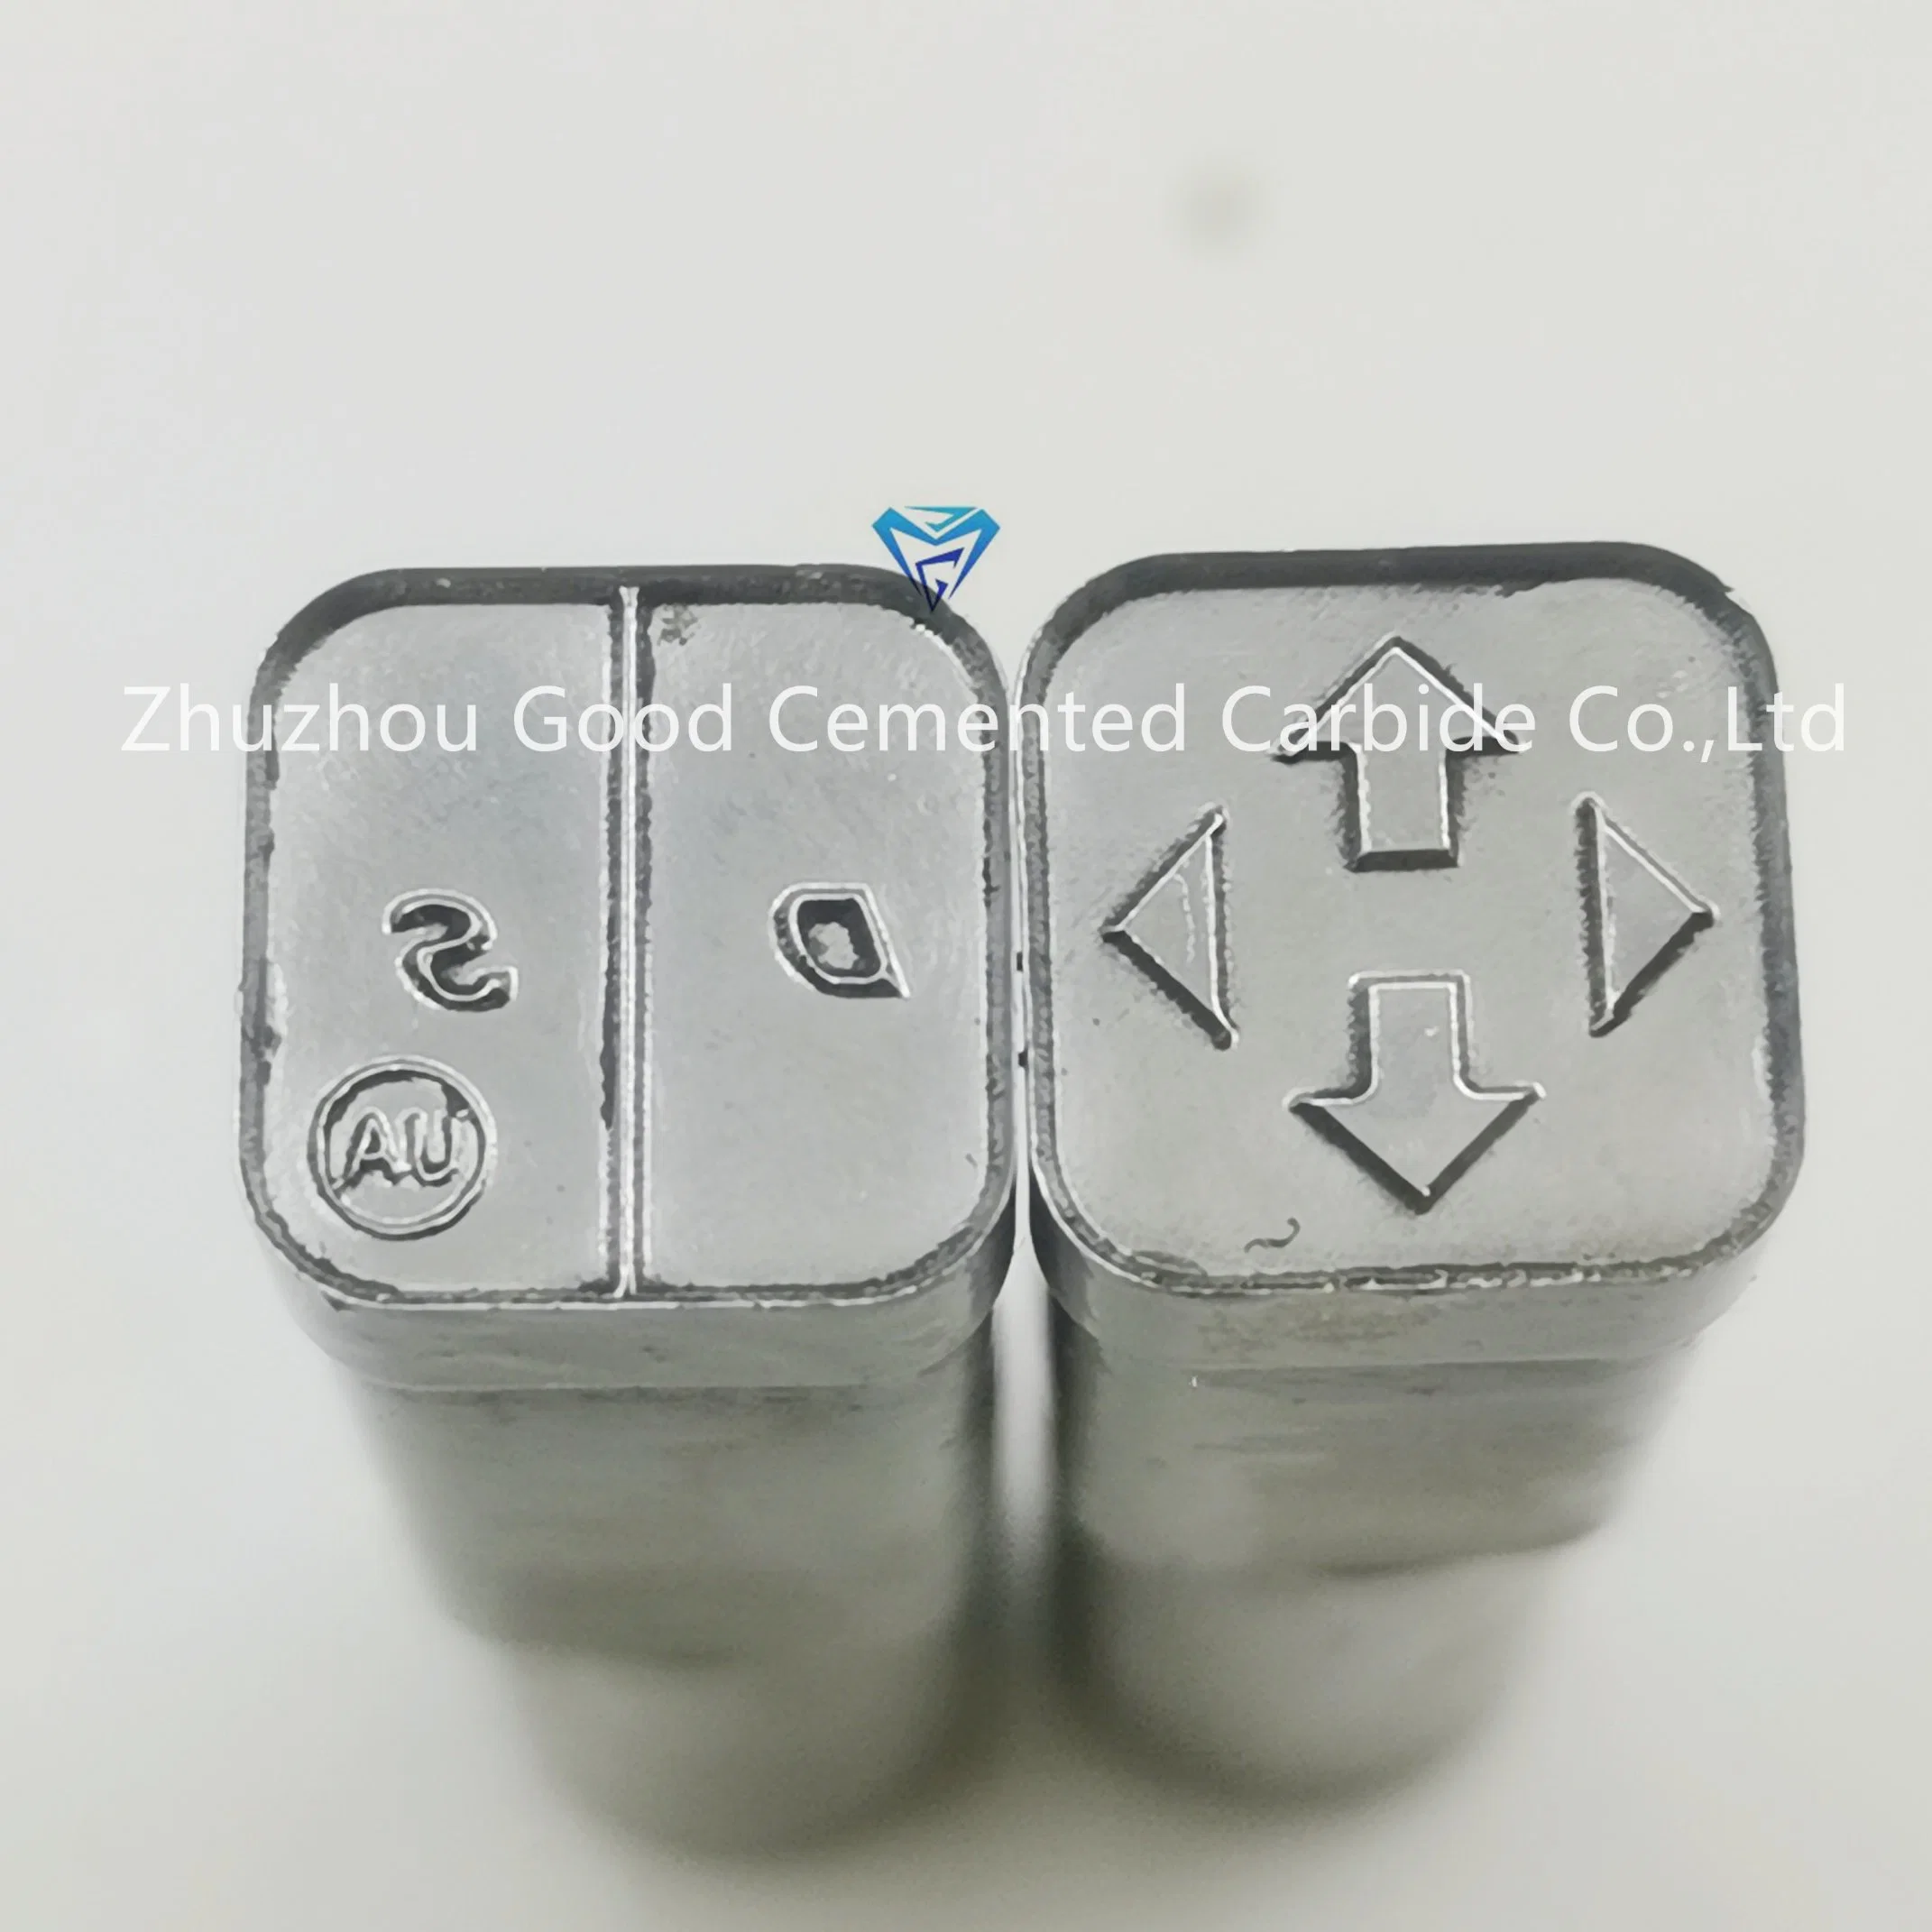 Wholesale/Supplier Tablet Punch Molds Milk Tablet Press Machine Dies Pill Maker Stamp Candy Machine Tool Parts Tdp-5 Punching Mold and Die